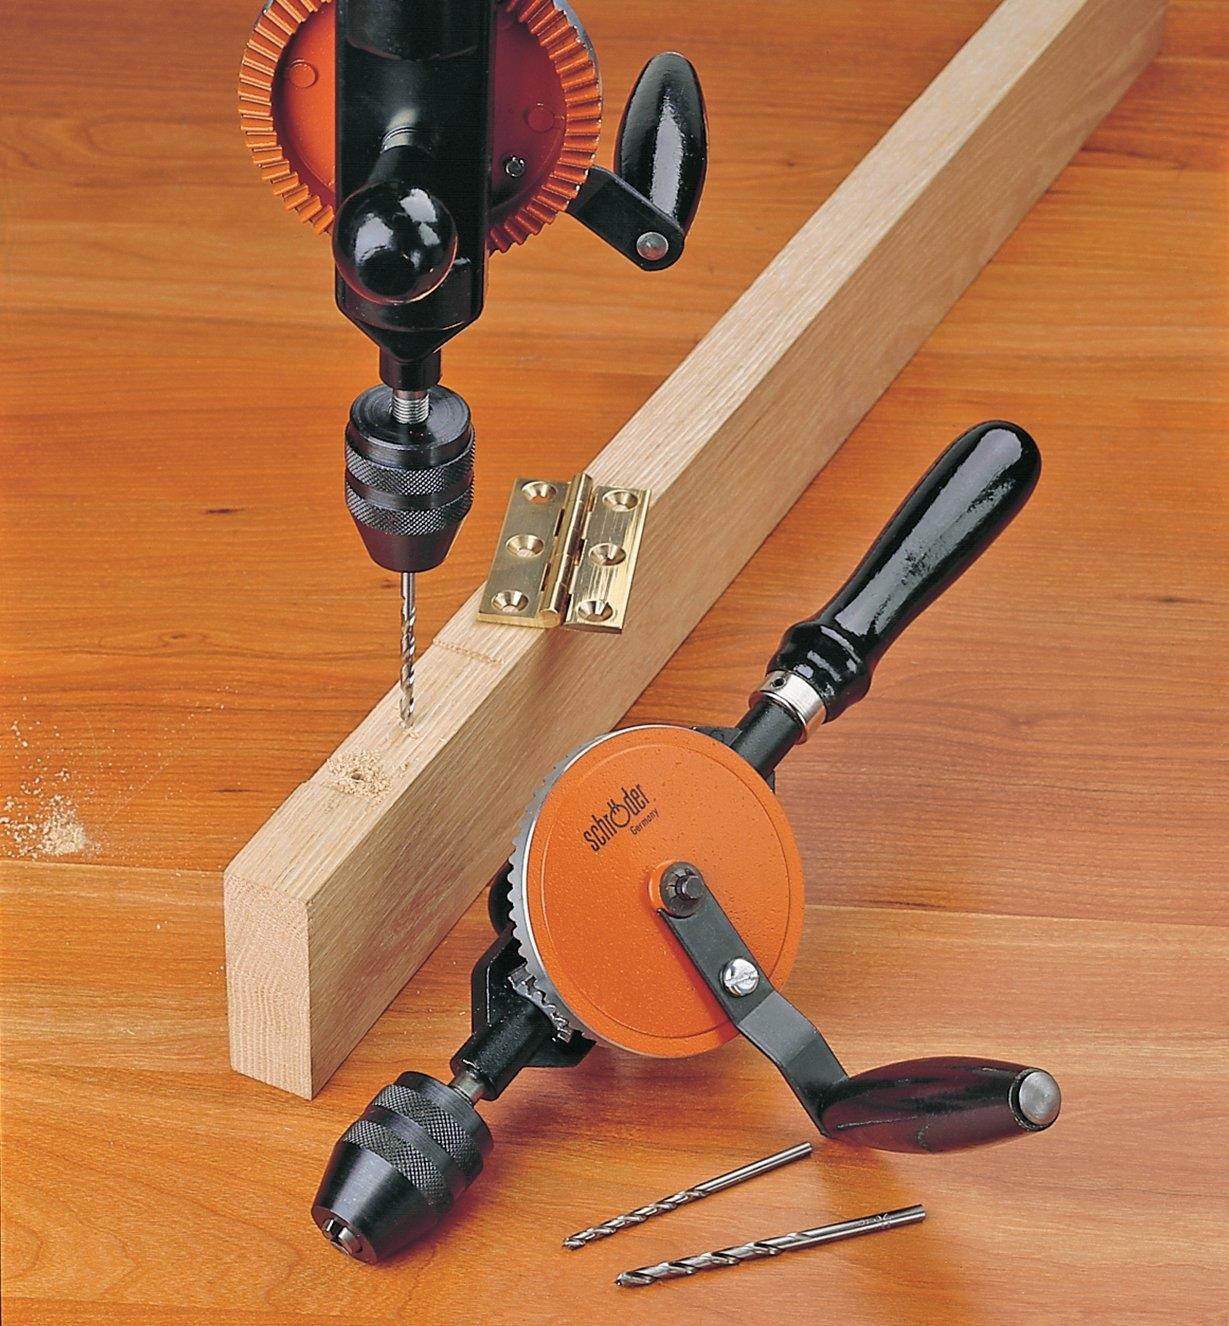 Using a Traditional Hand Drill to drill into the side of a board